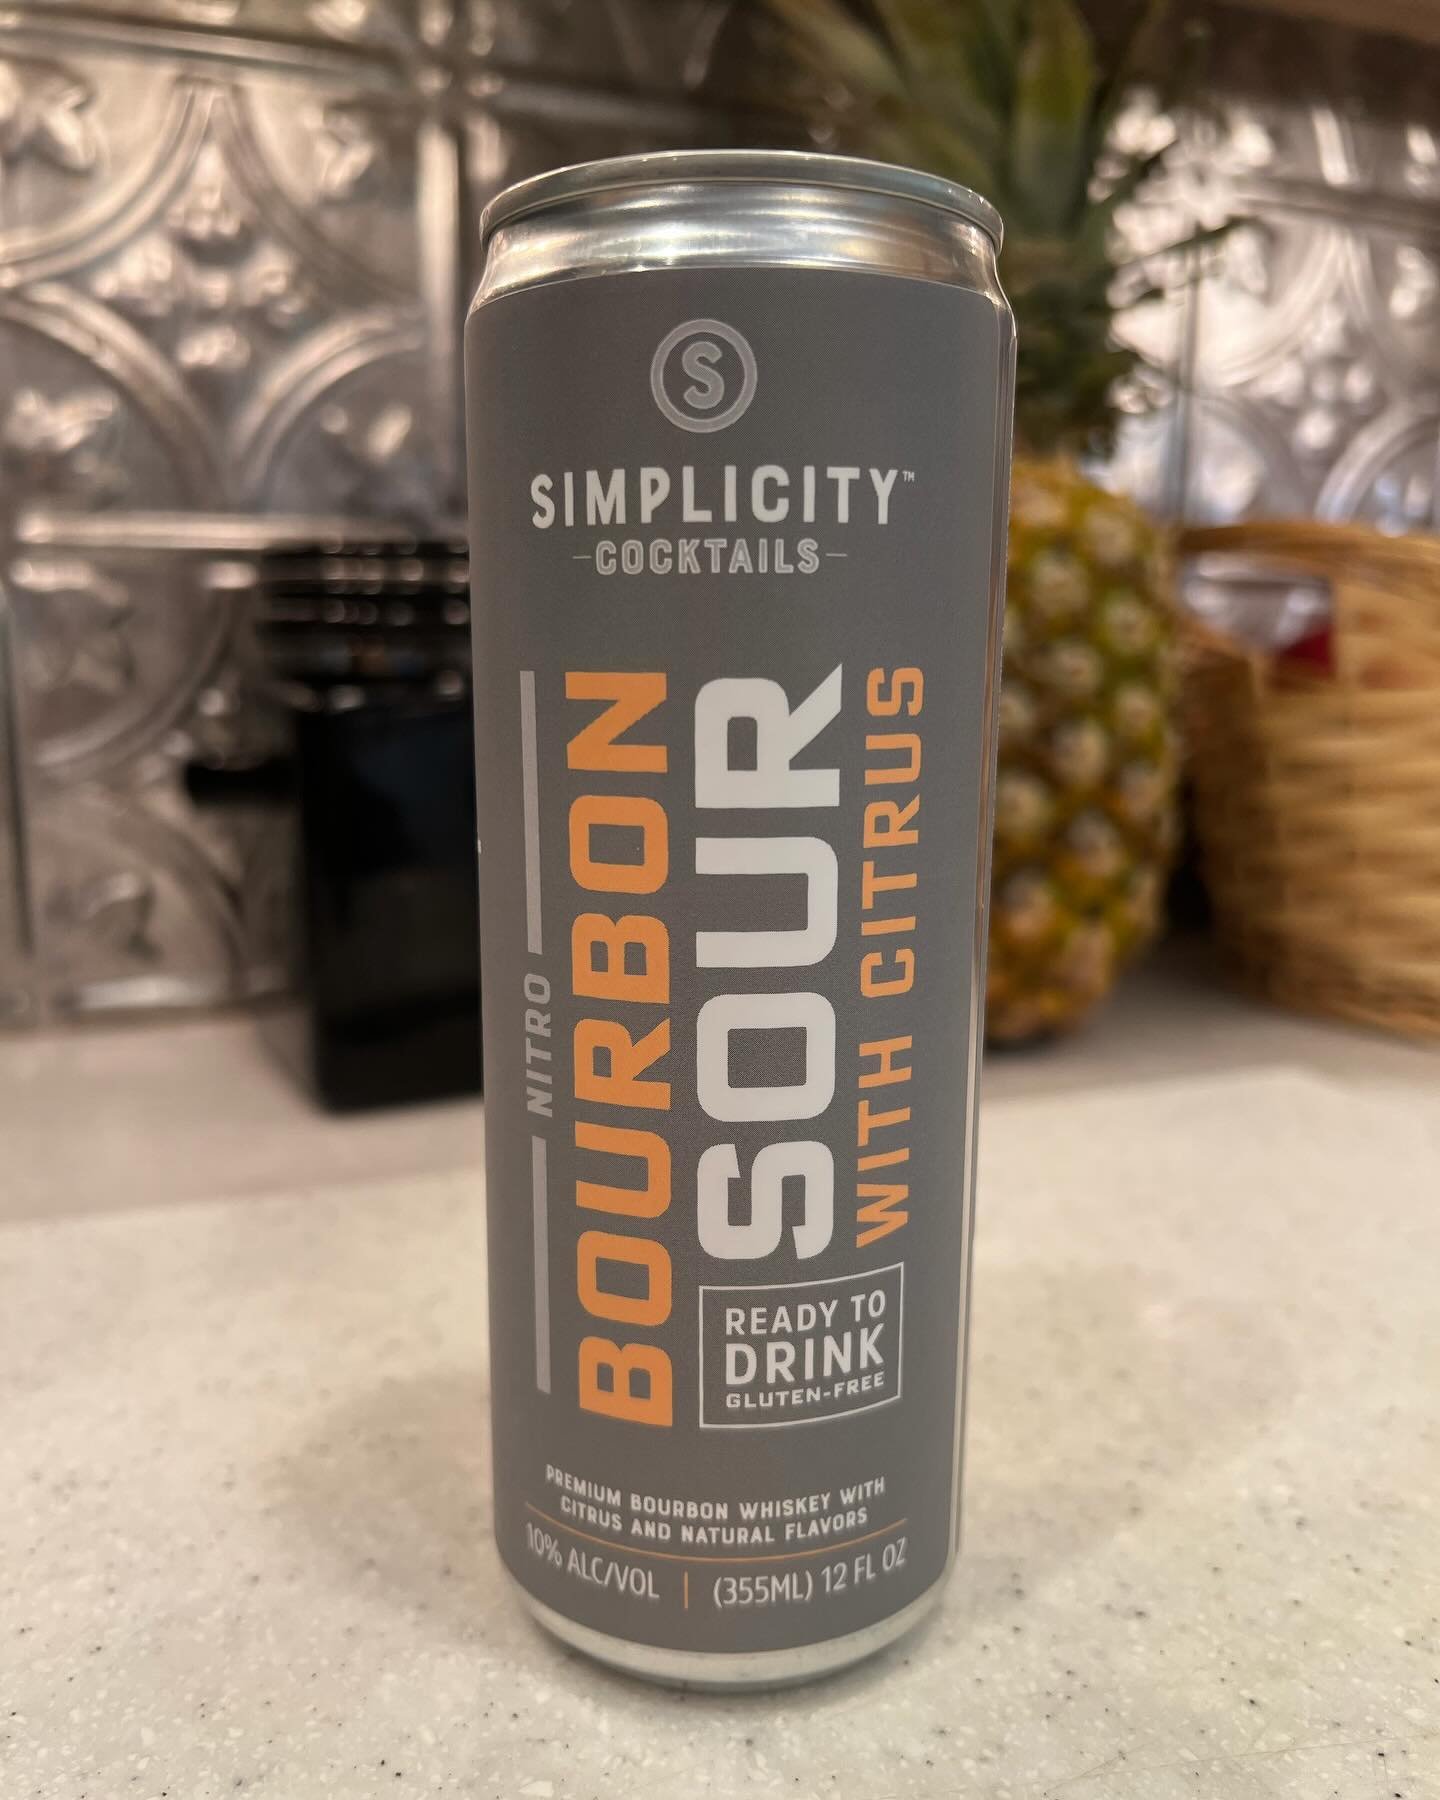 Many of you have seen it on our walls - well tomorrow it will be in our fridge, ready to buy! Follow the instructions on the can to truly enjoy the Nitro Bourbon Sour 🥳